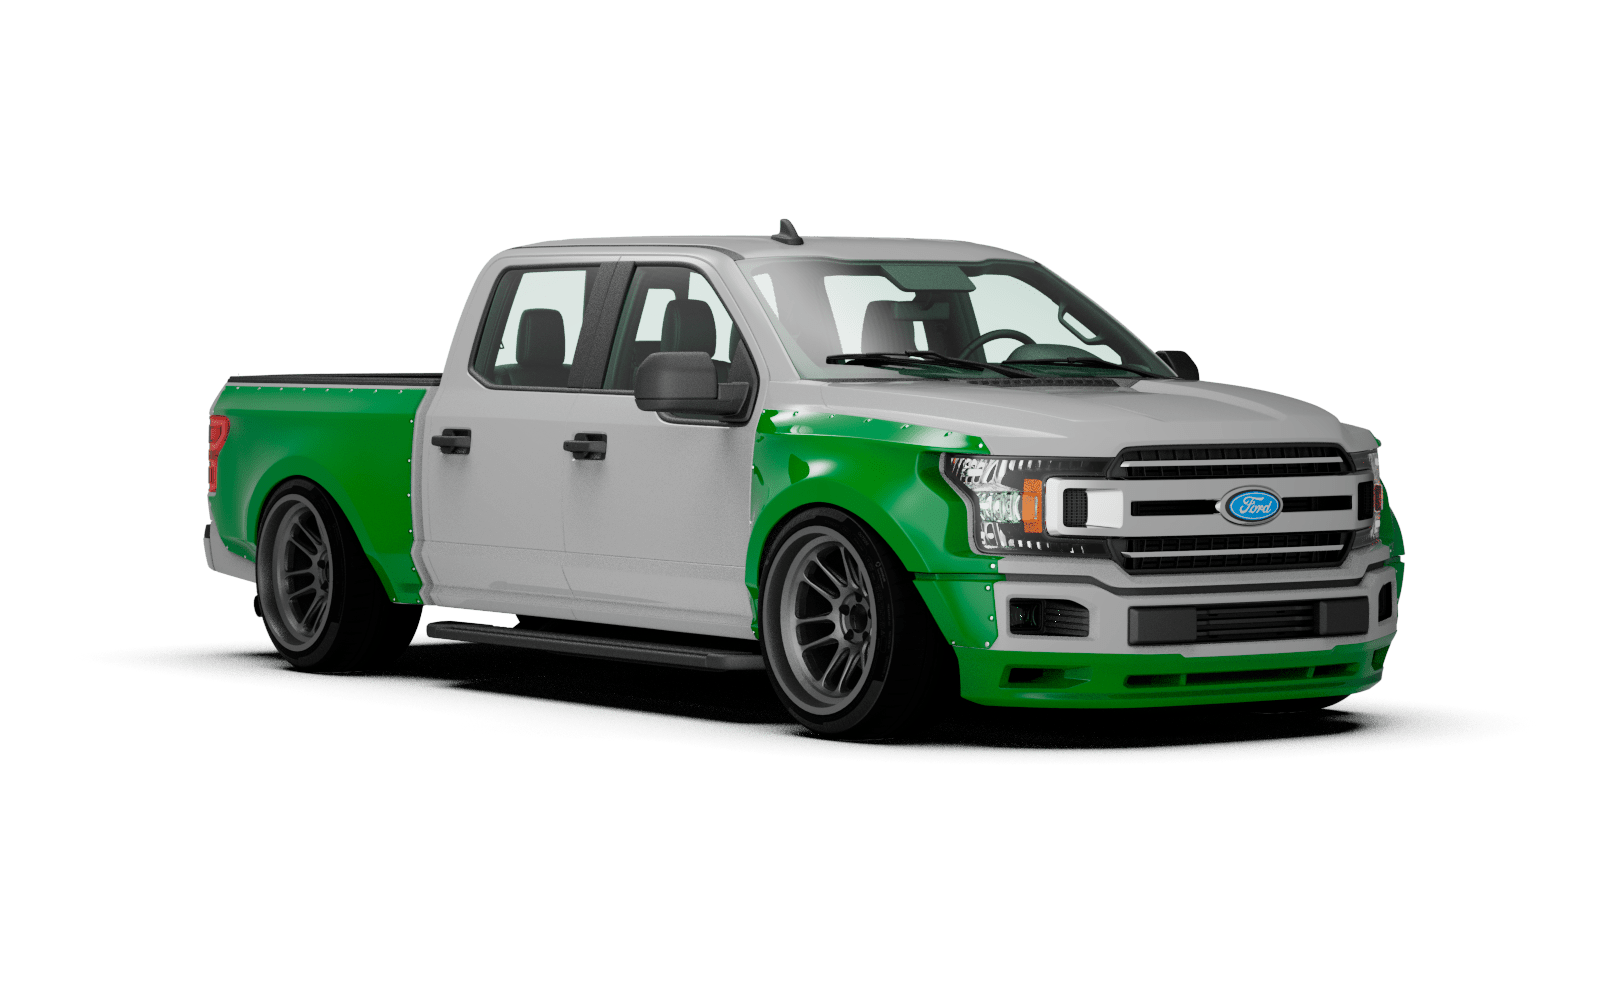 Clinched Ford F-150 (5.5 bed) Widebody Kit | ML Performance UK Car Parts